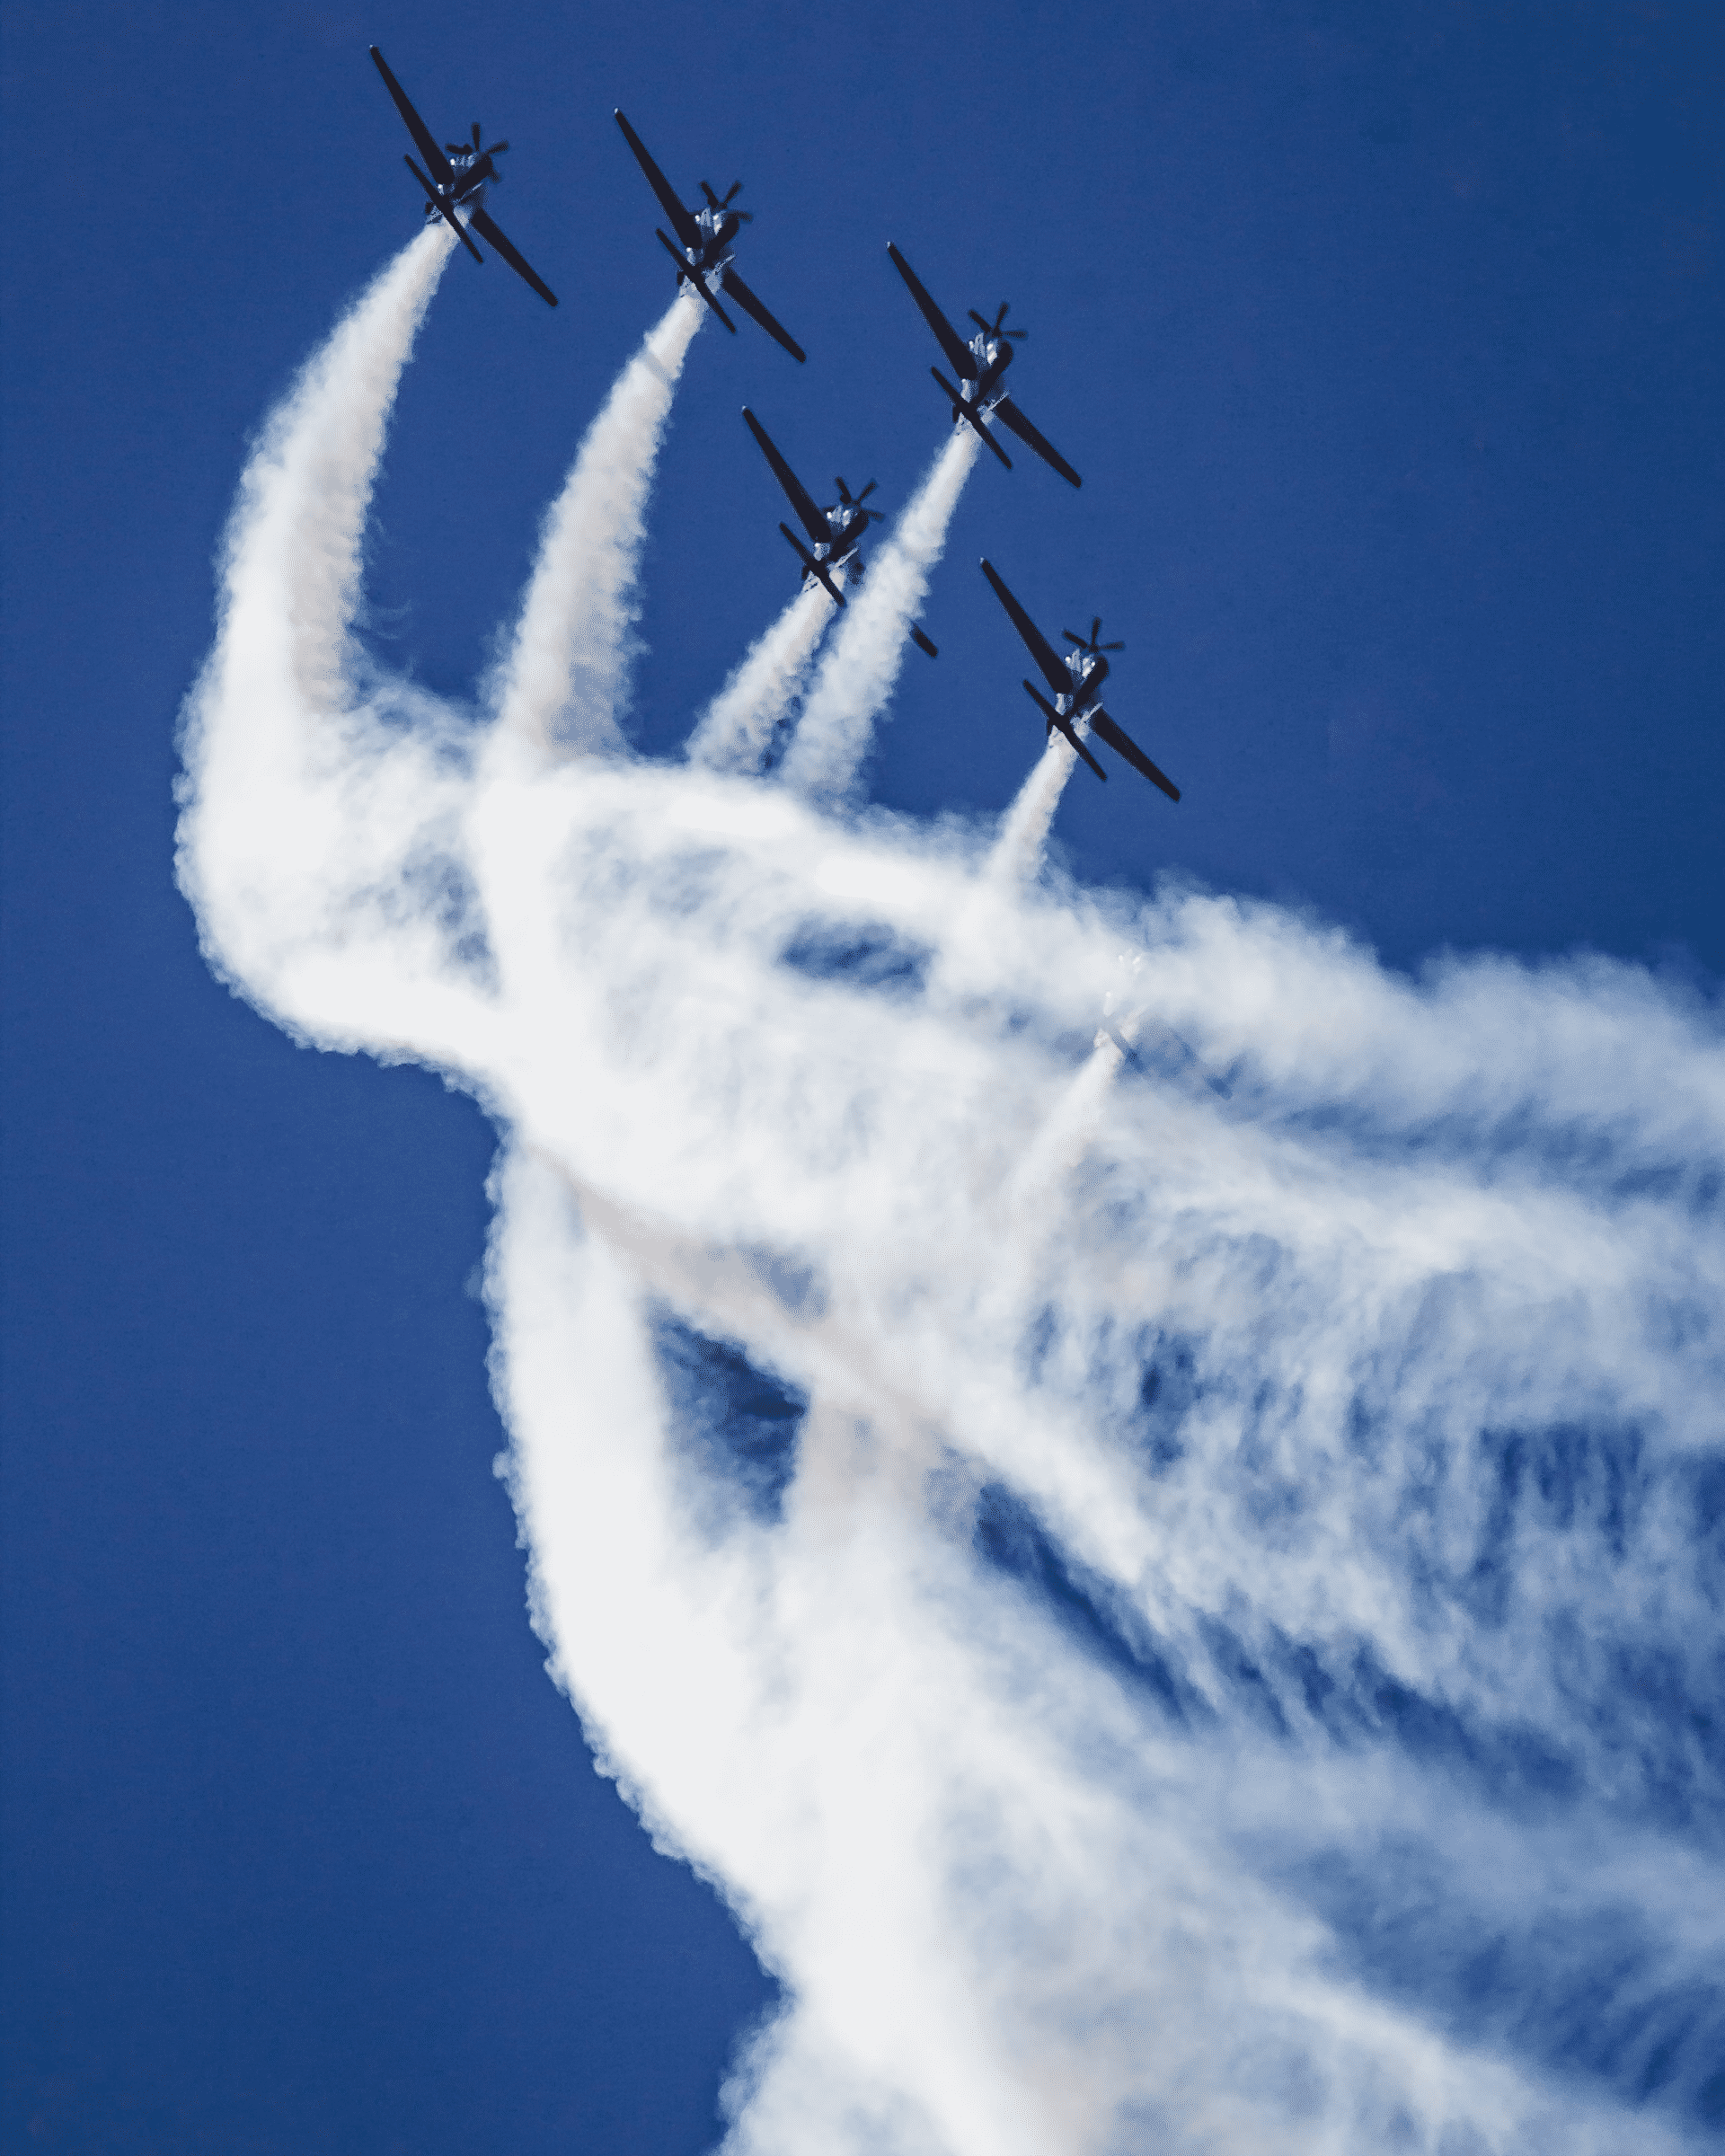 Planes in formation with a smoke trail